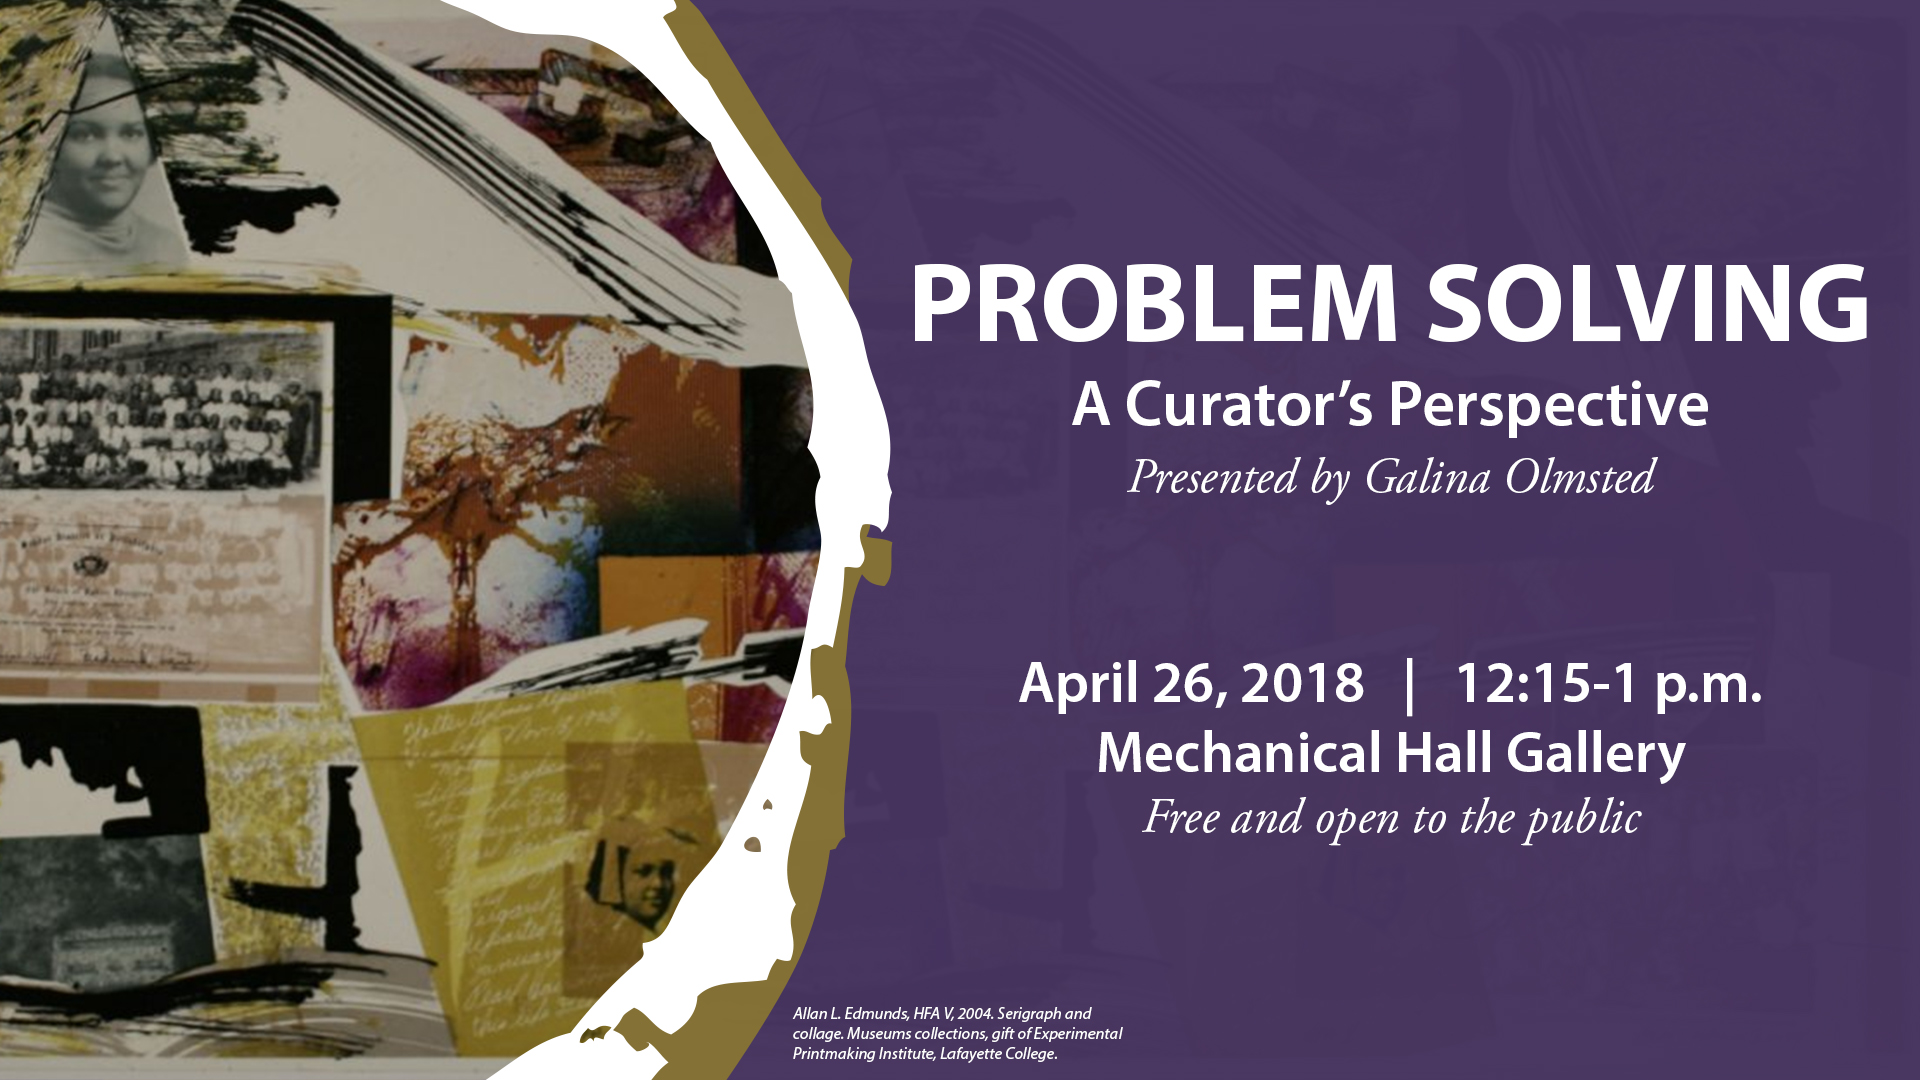 Problem Solving: A Curator's Perspective